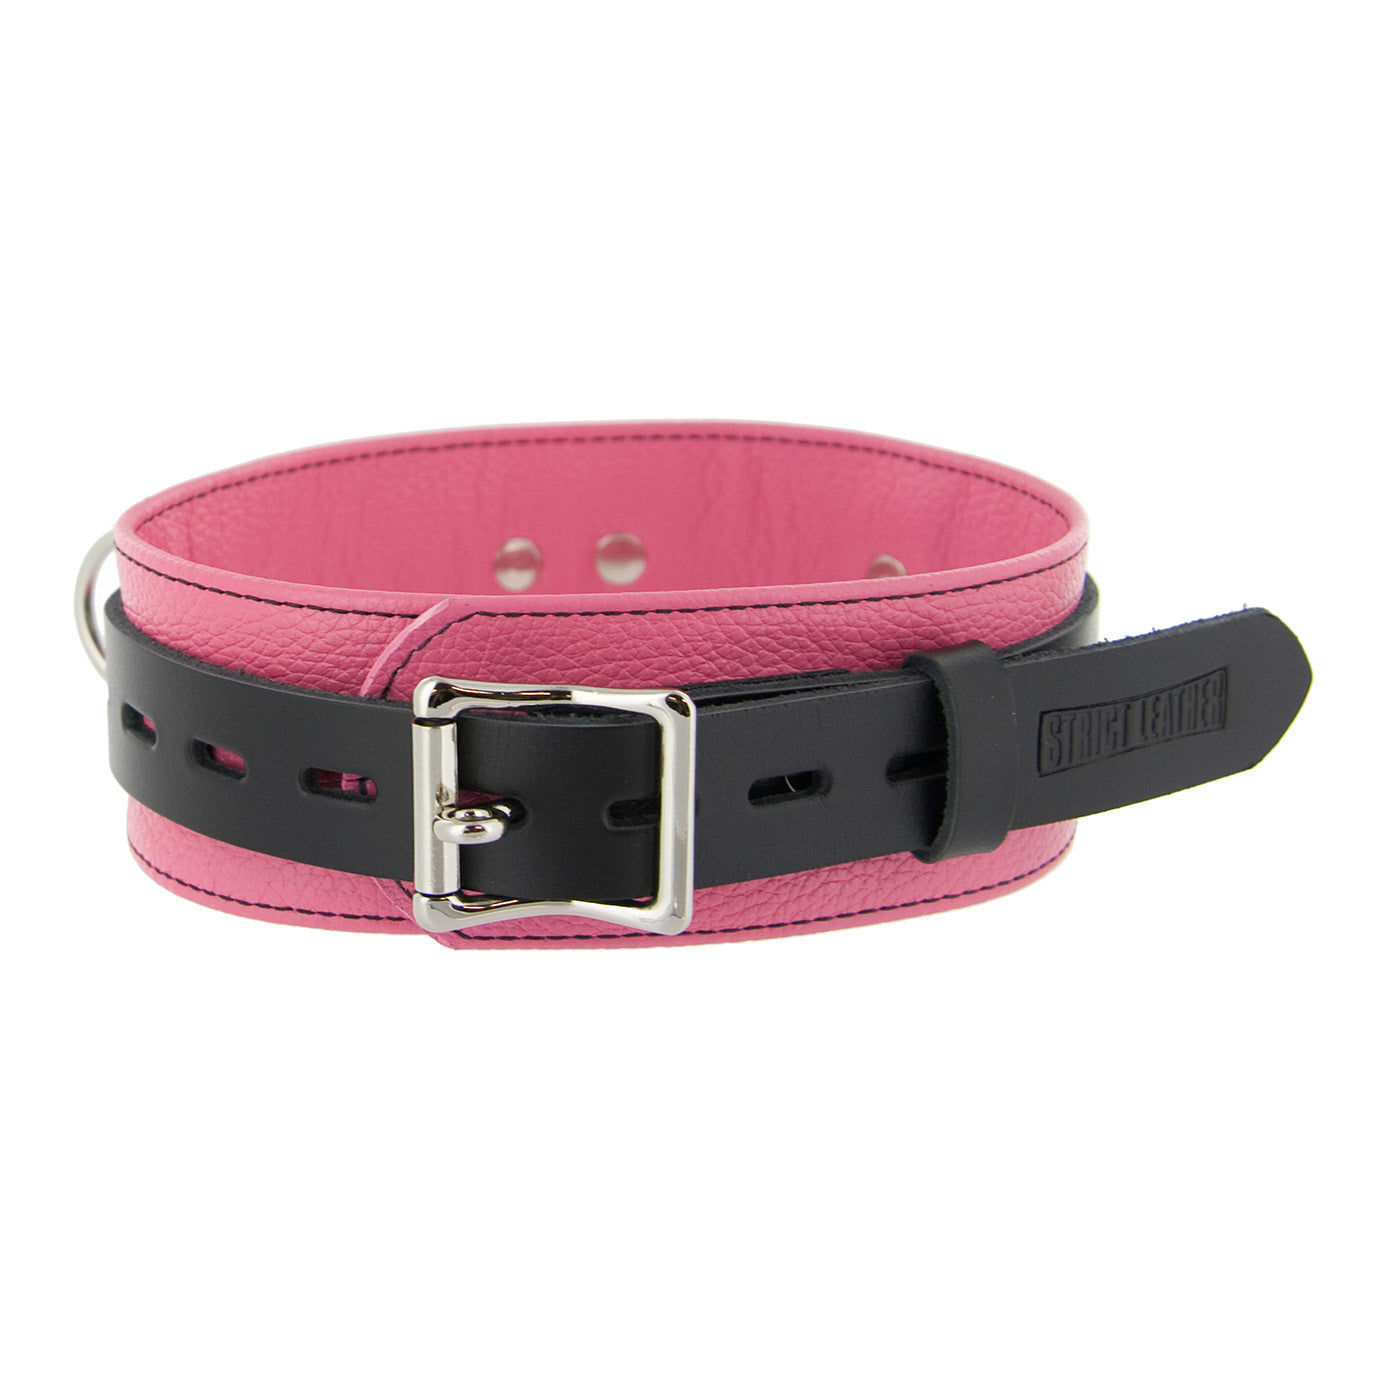 Strict Leather Deluxe Locking Collar - Pink and Black